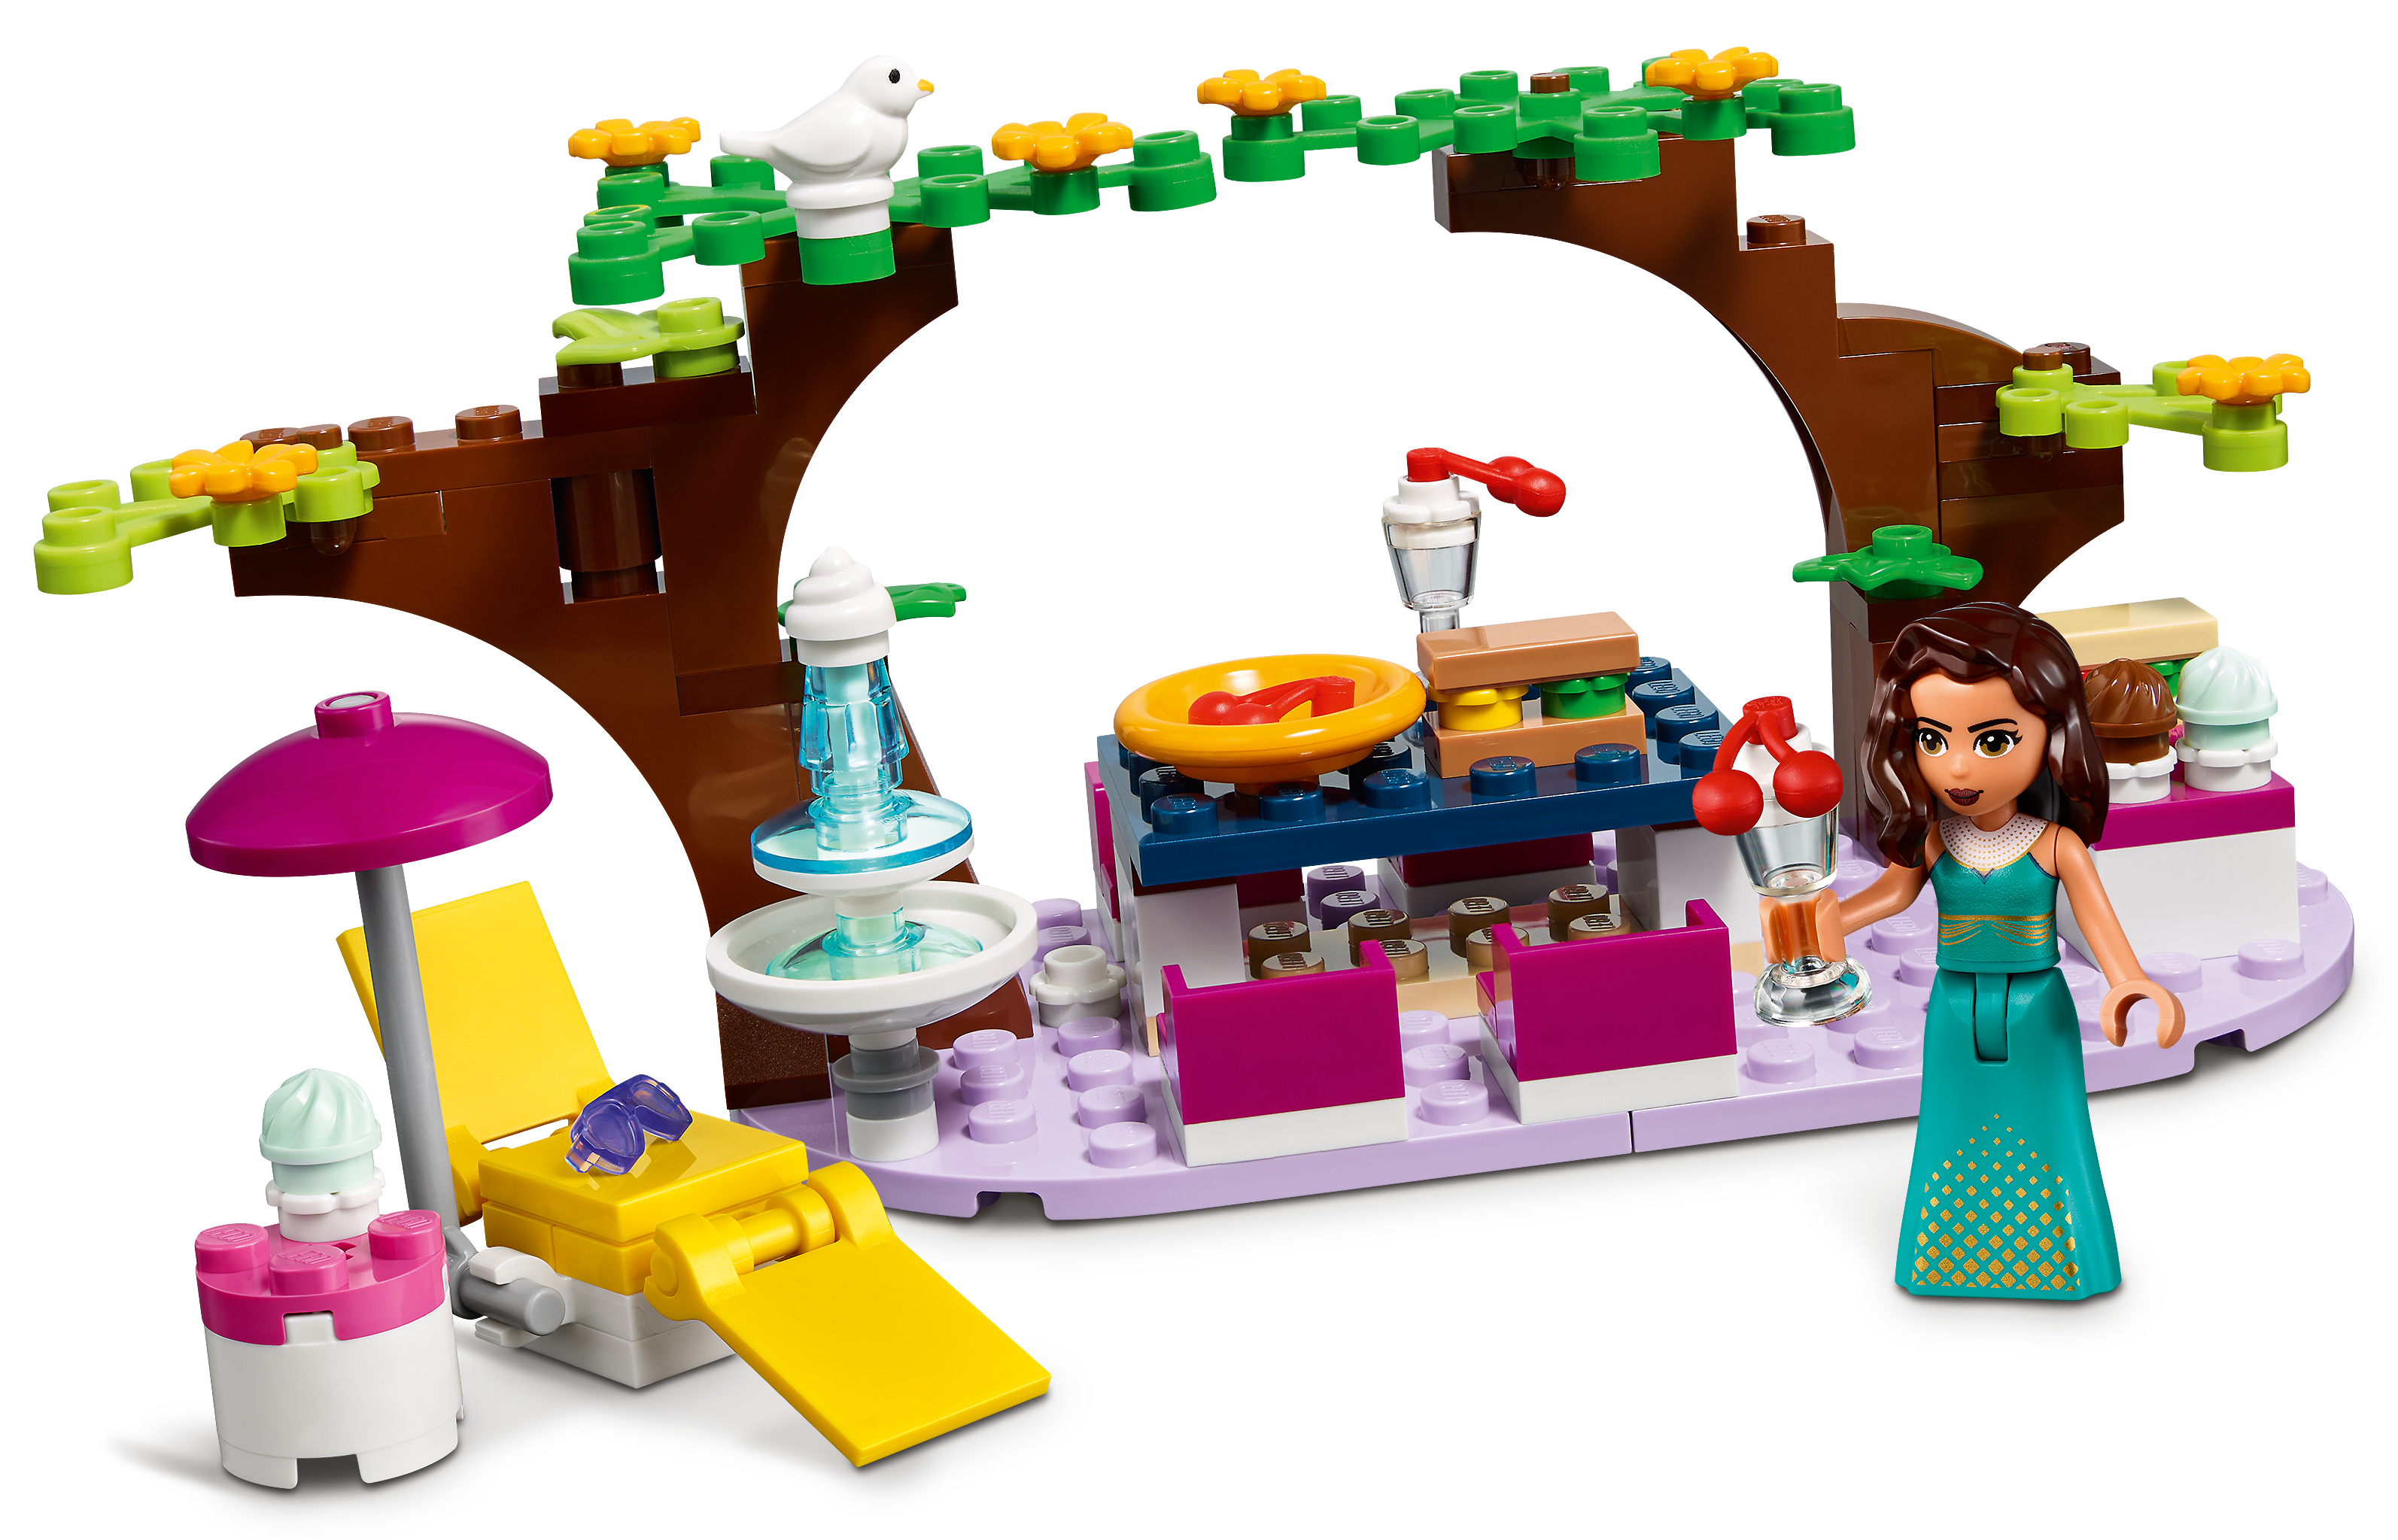 41684 LEGO Friends Heartlake City Grand Hotel Playset 1308 Pieces Age 8 Years+